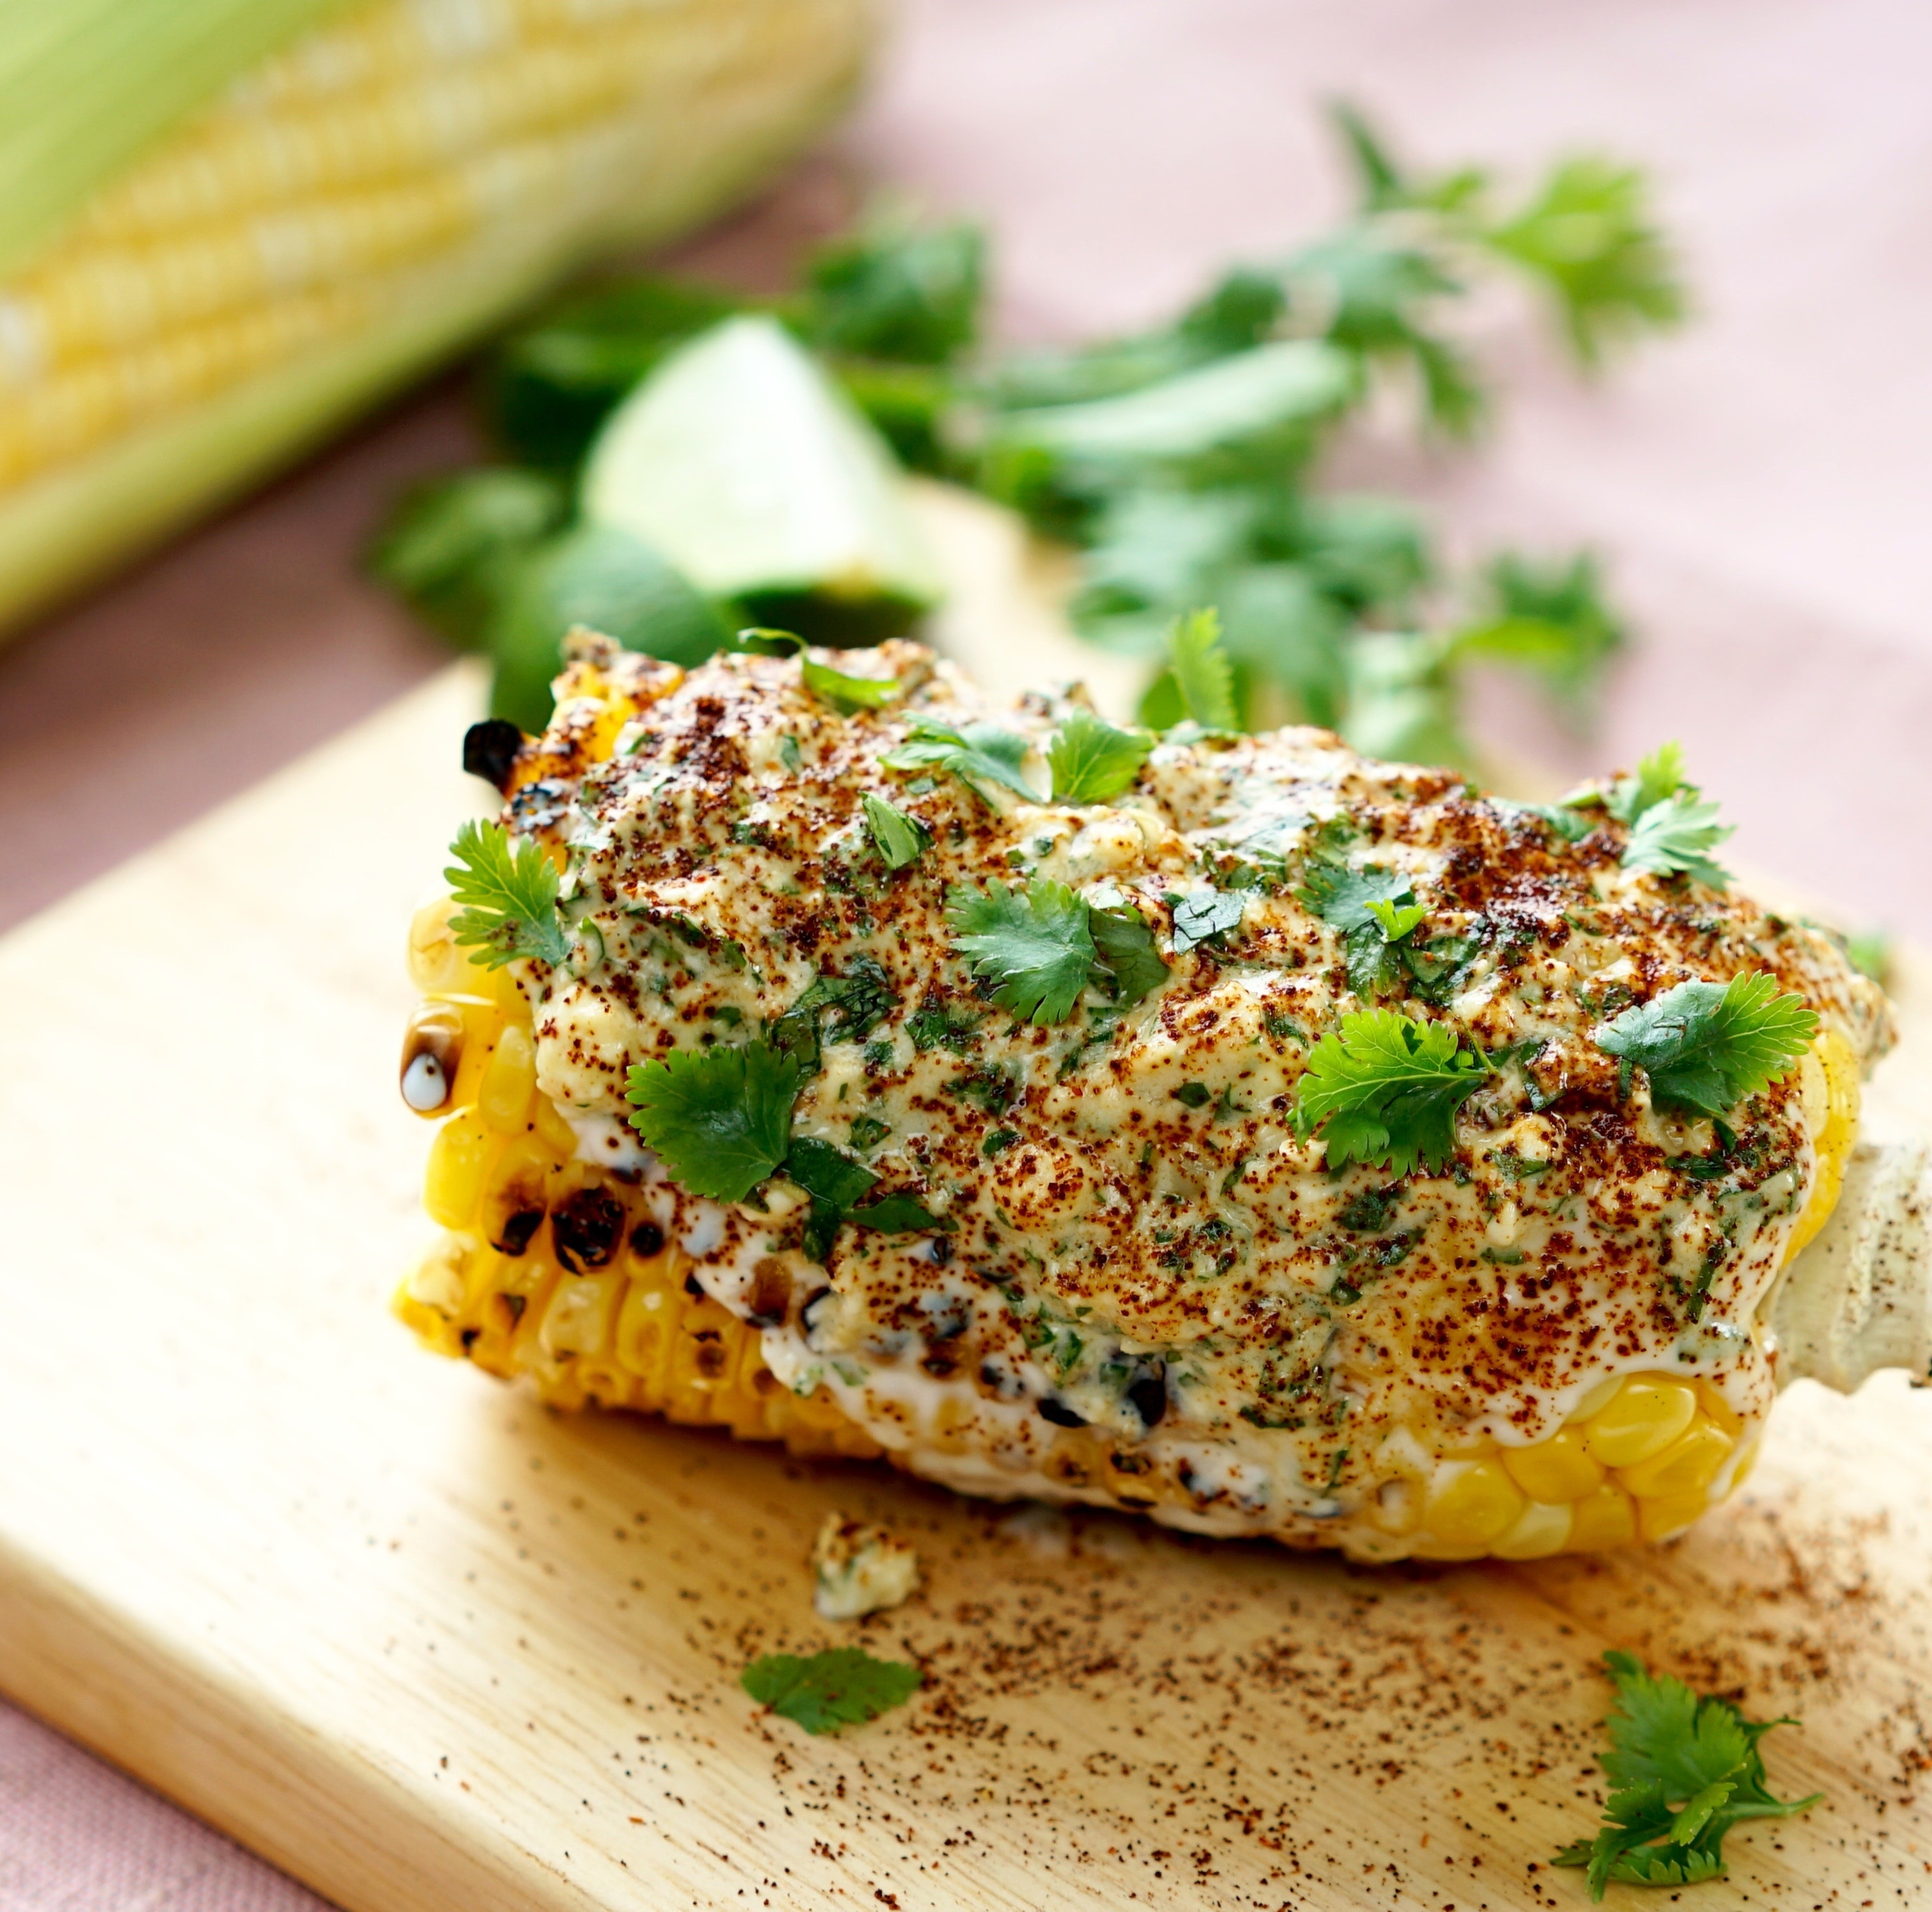 grilled corn with cream and green leaf vegetable